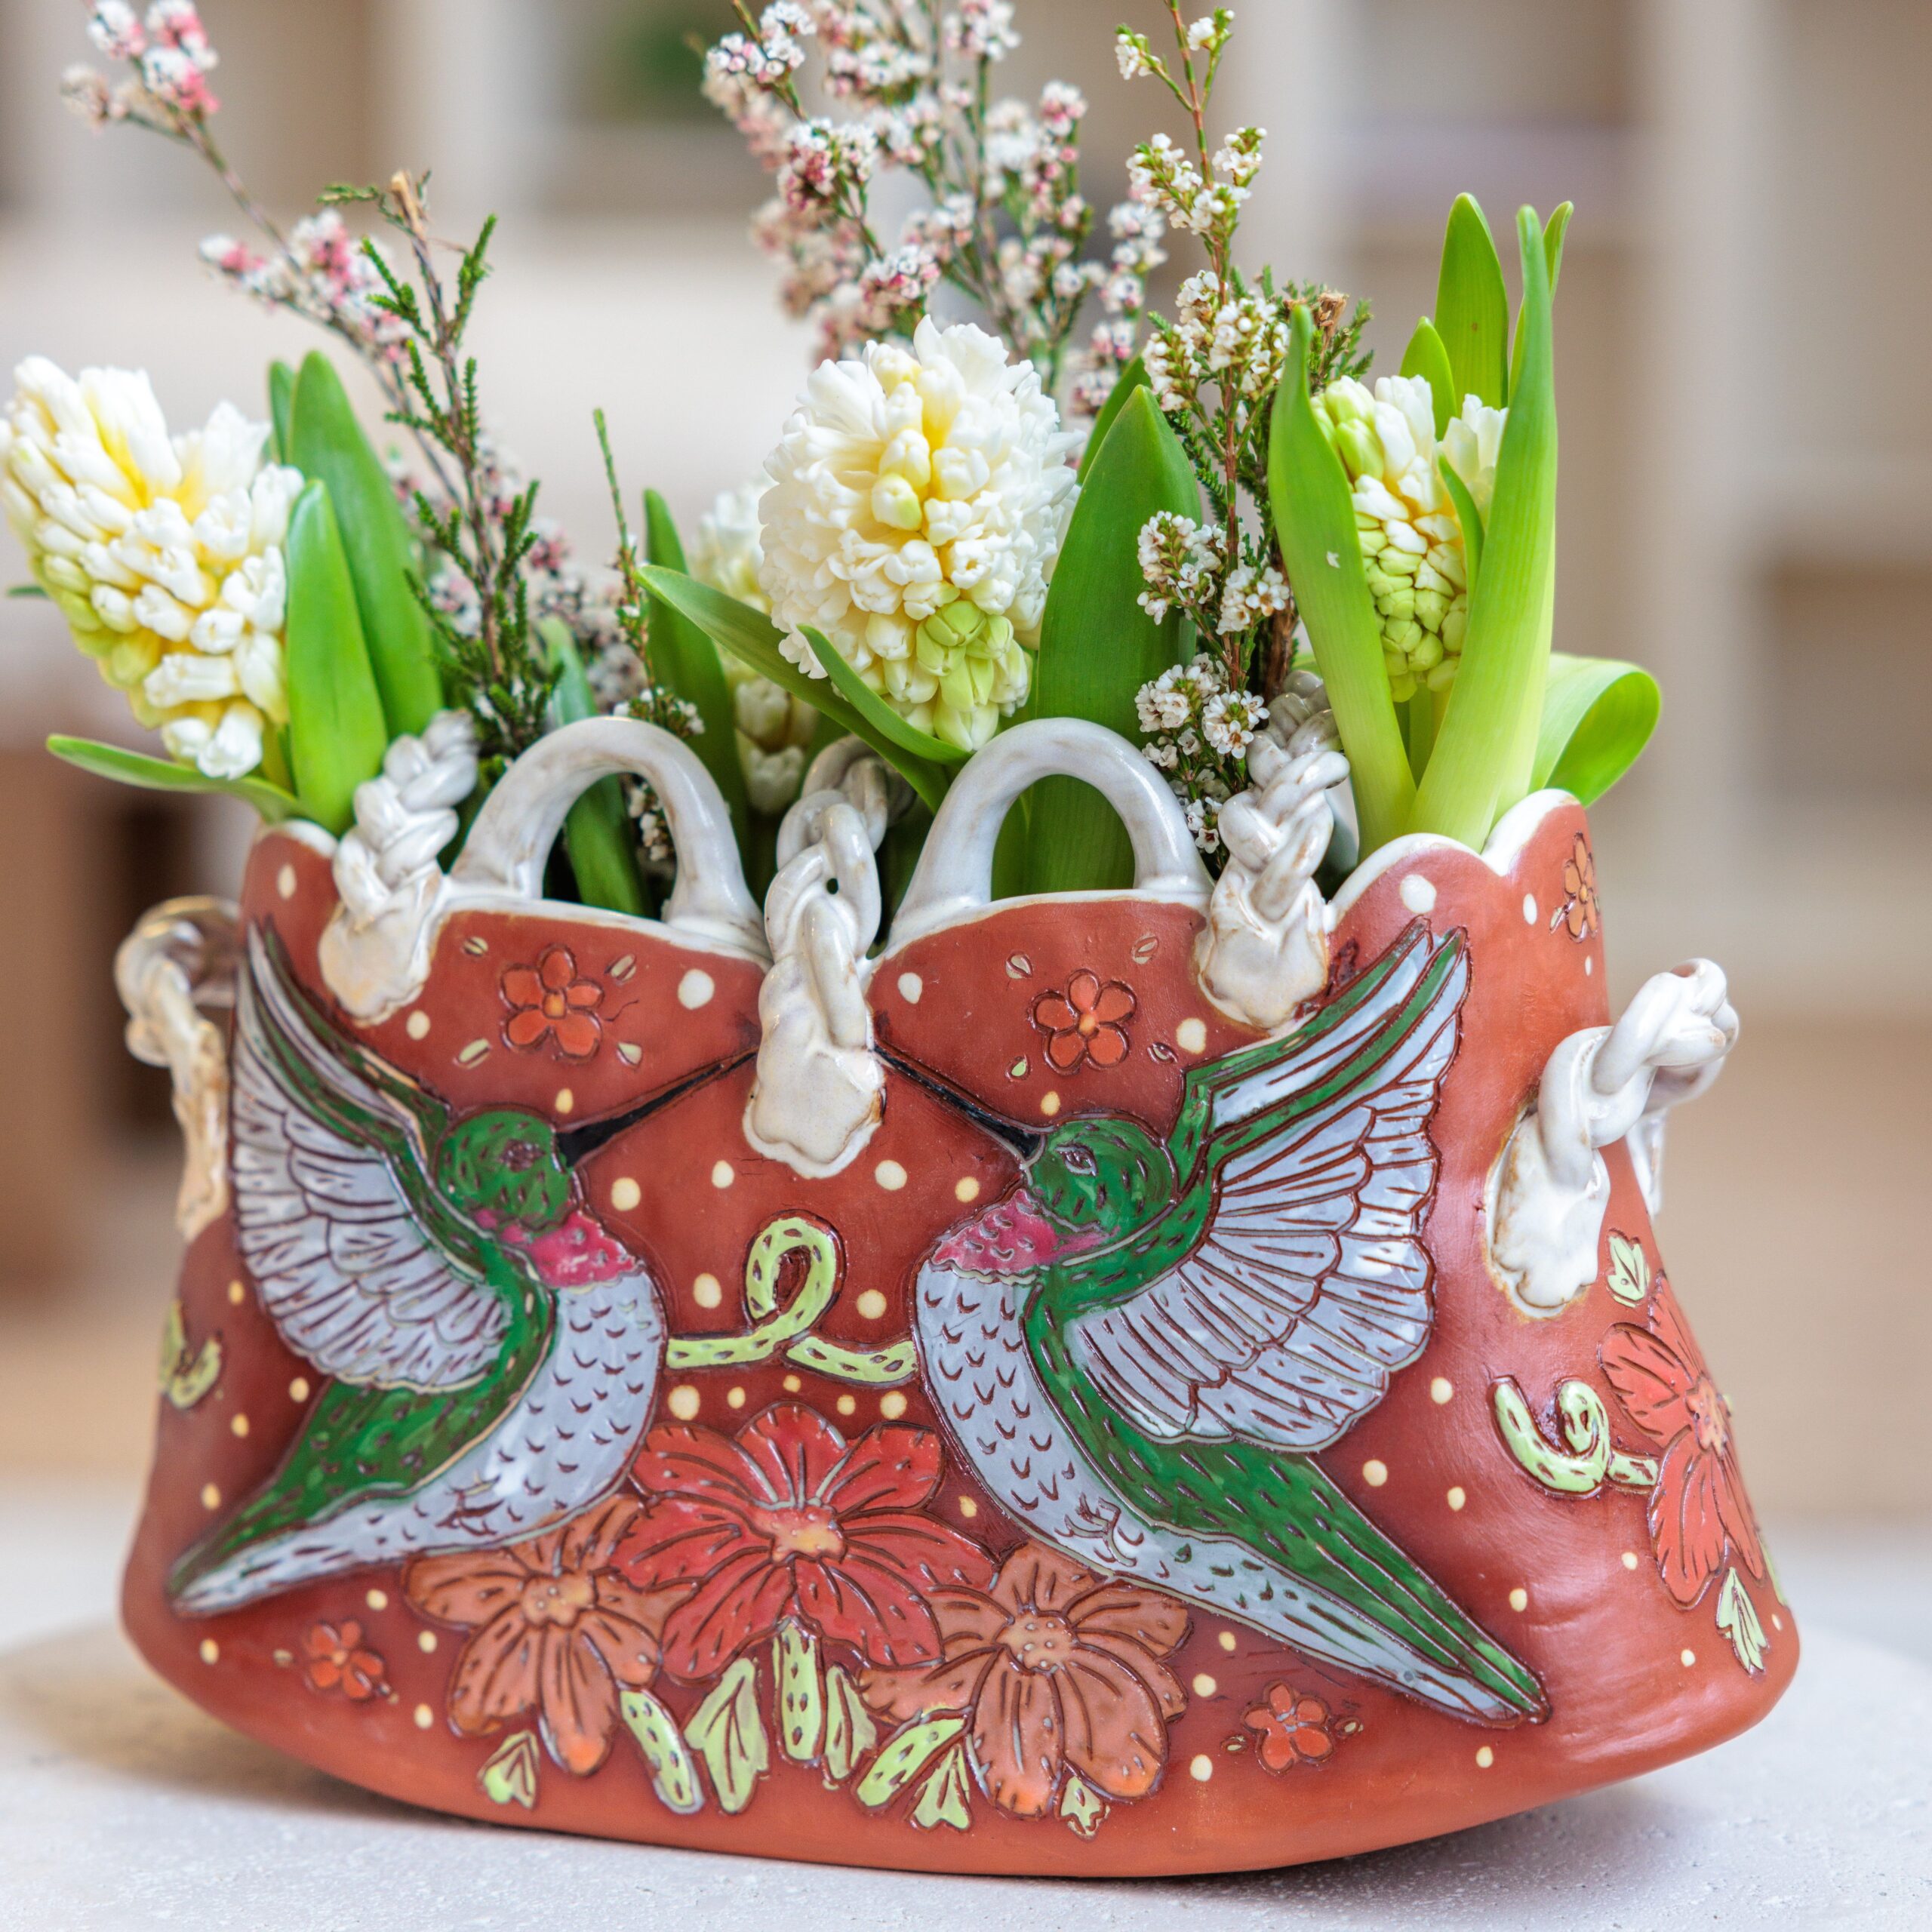 Zoe Pinnell: Hummingbird Basket Product Image 3 of 3